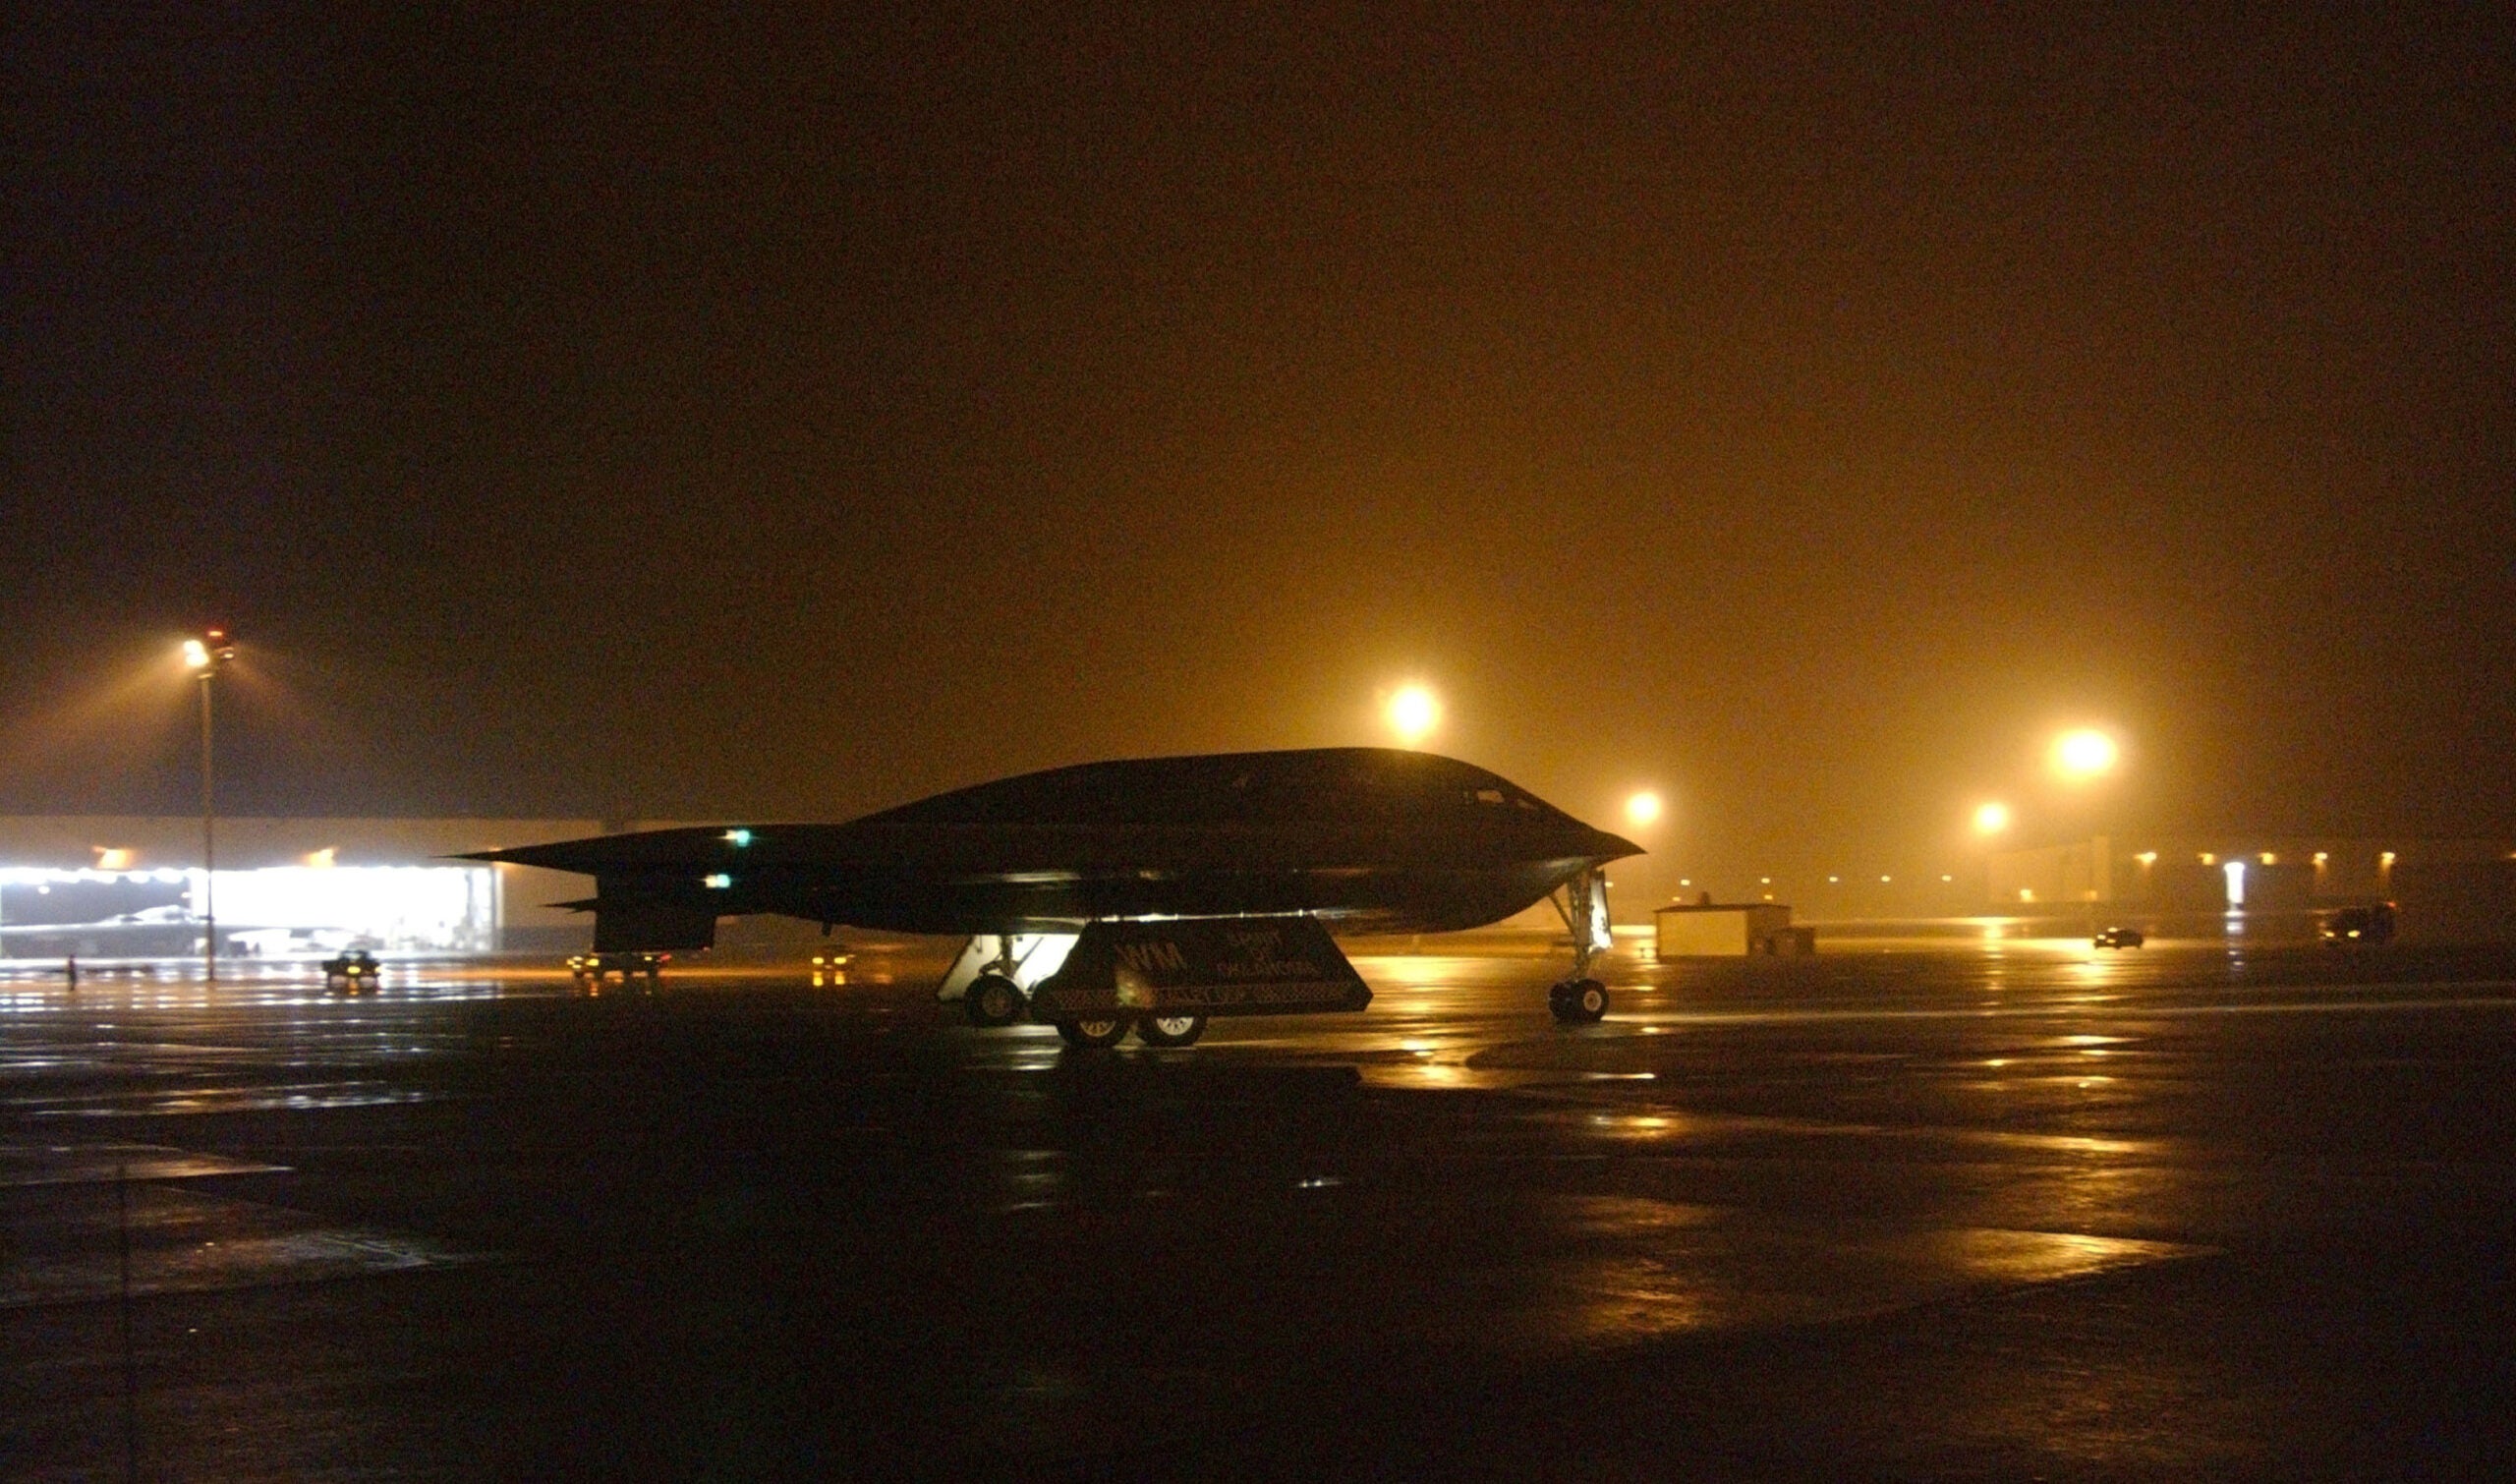 WHITEMAN AIR FORCE BASE, MO - MARCH 13:  A B-2 Spirit bomber taxies to the runway at Whiteman Air Force Base March 13, 2003 in Missouri. The Spirit bomber and other bombers are deploying from Whiteman Air Force Base to an unspecified forward location to support a possible conflict with Iraq.  (Photo by Michael Gaddis/USAF/Getty Images)